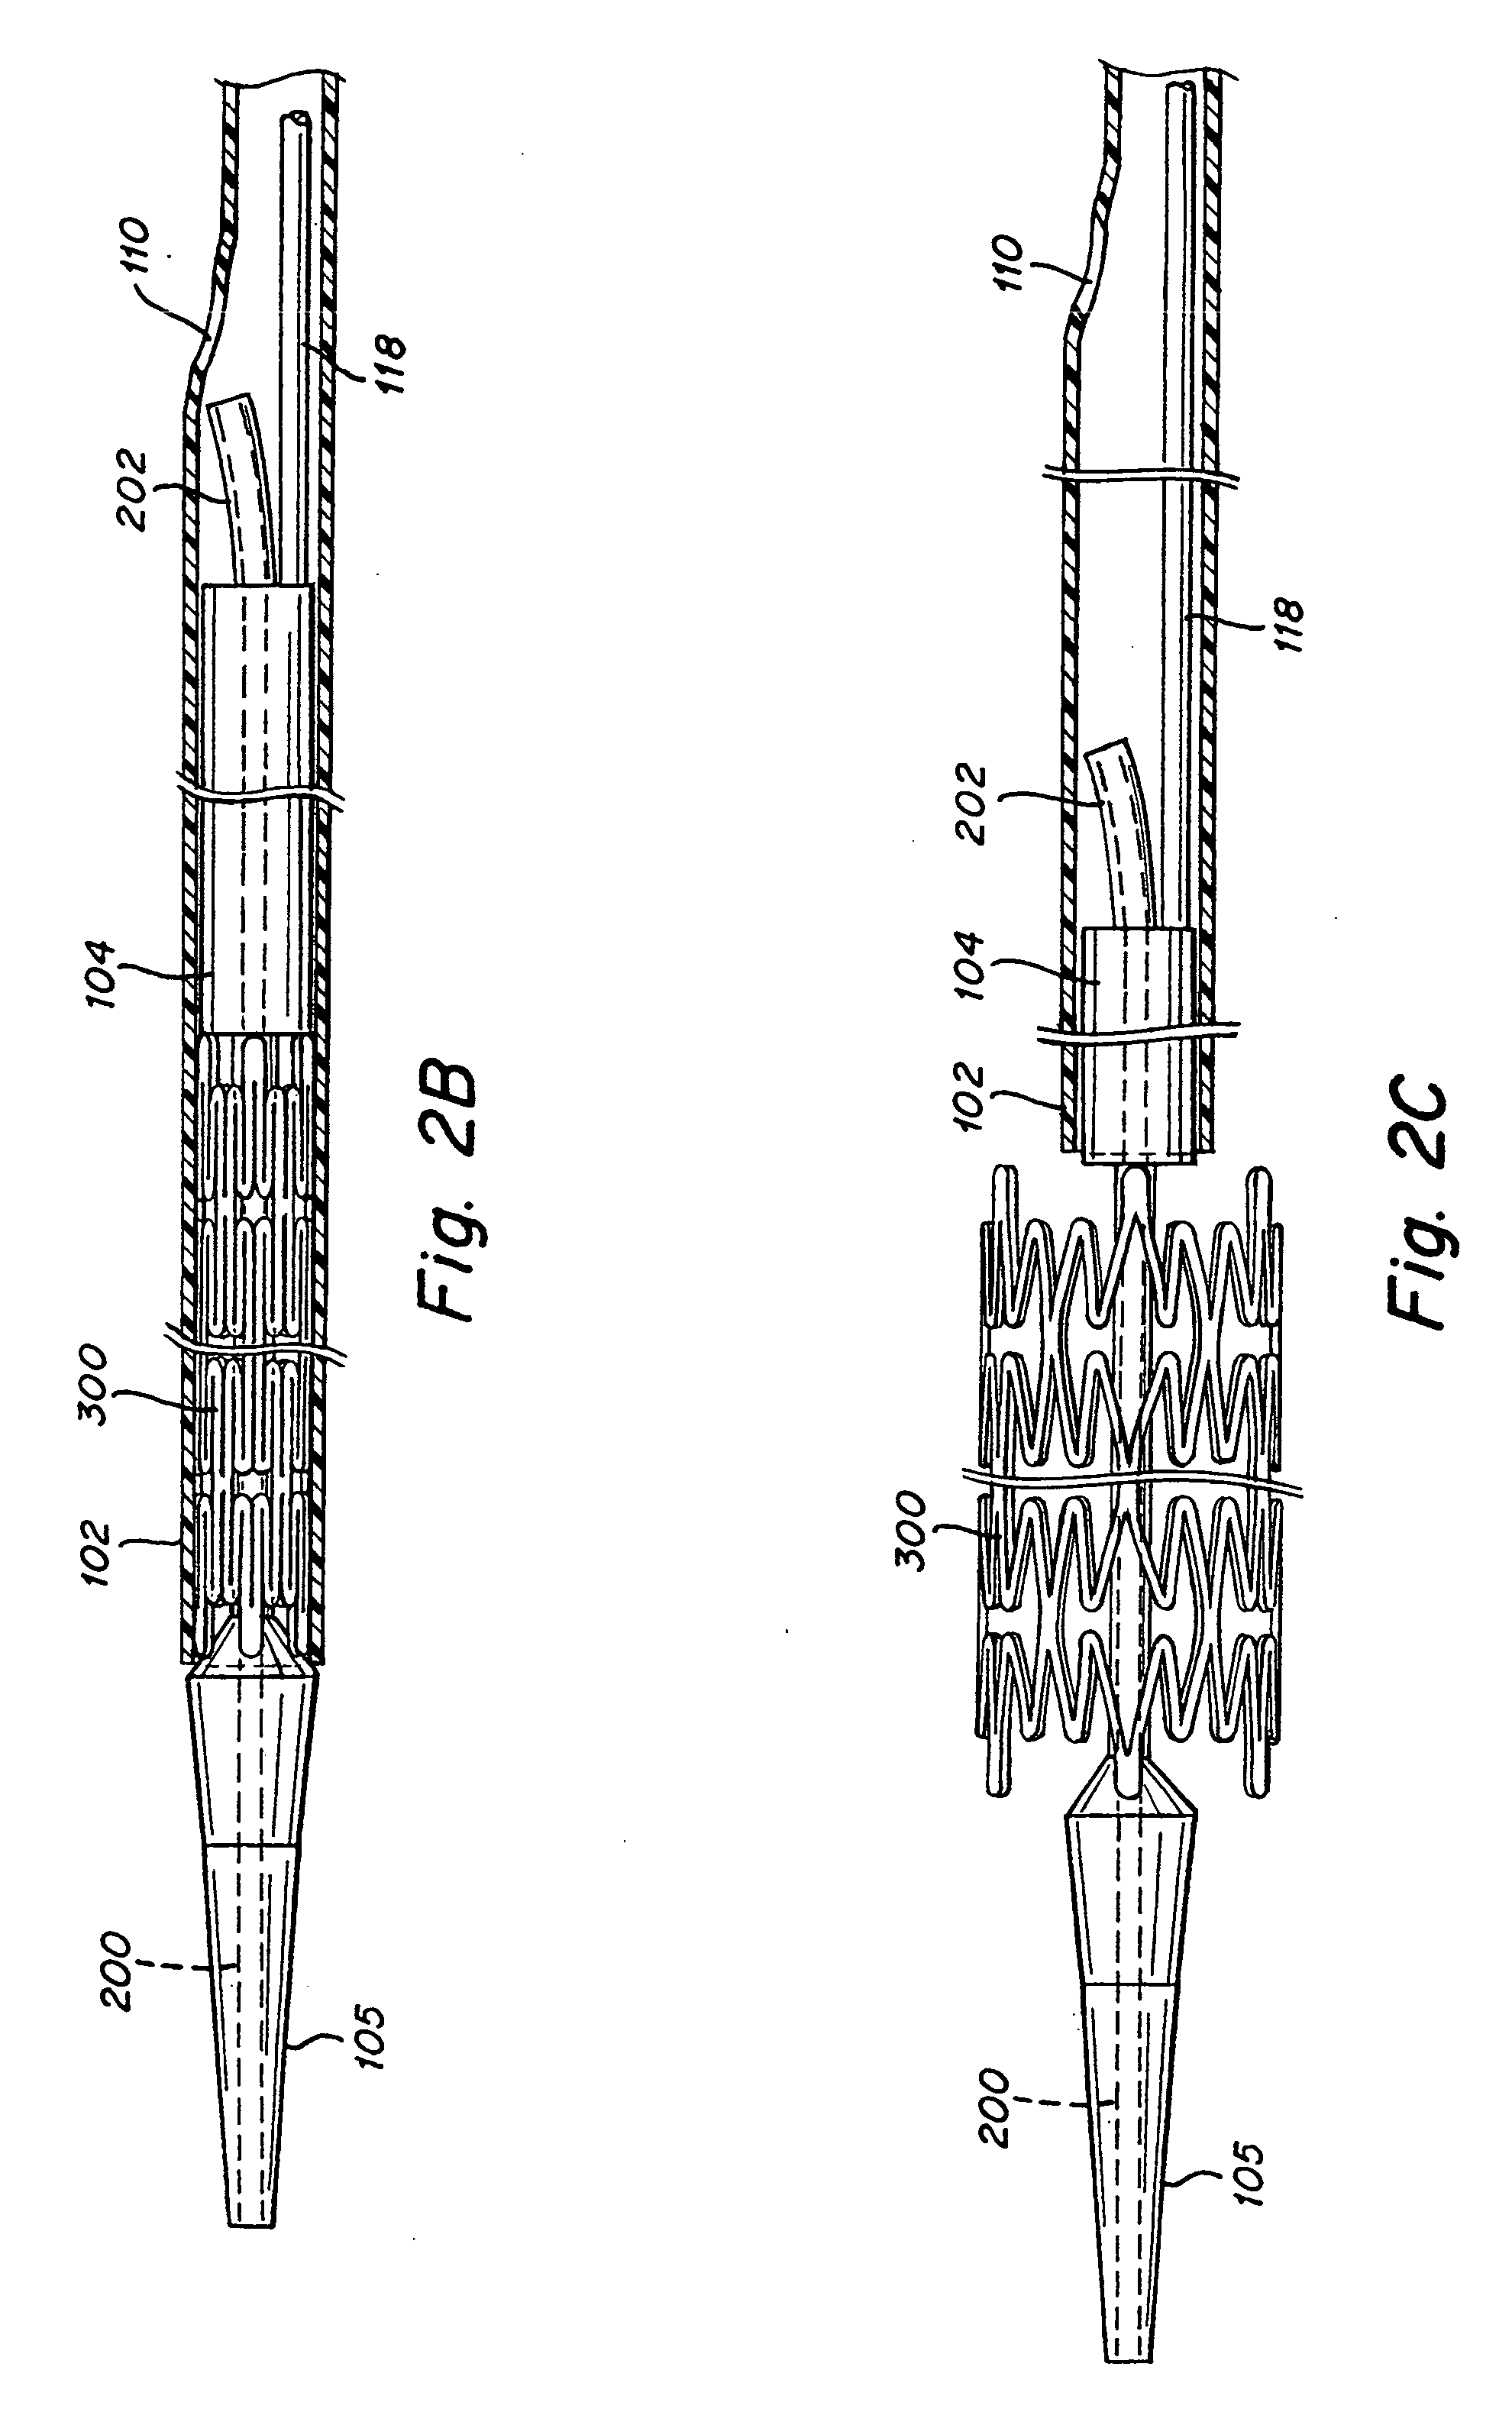 Implant delivery system with interlocked RX port orientation